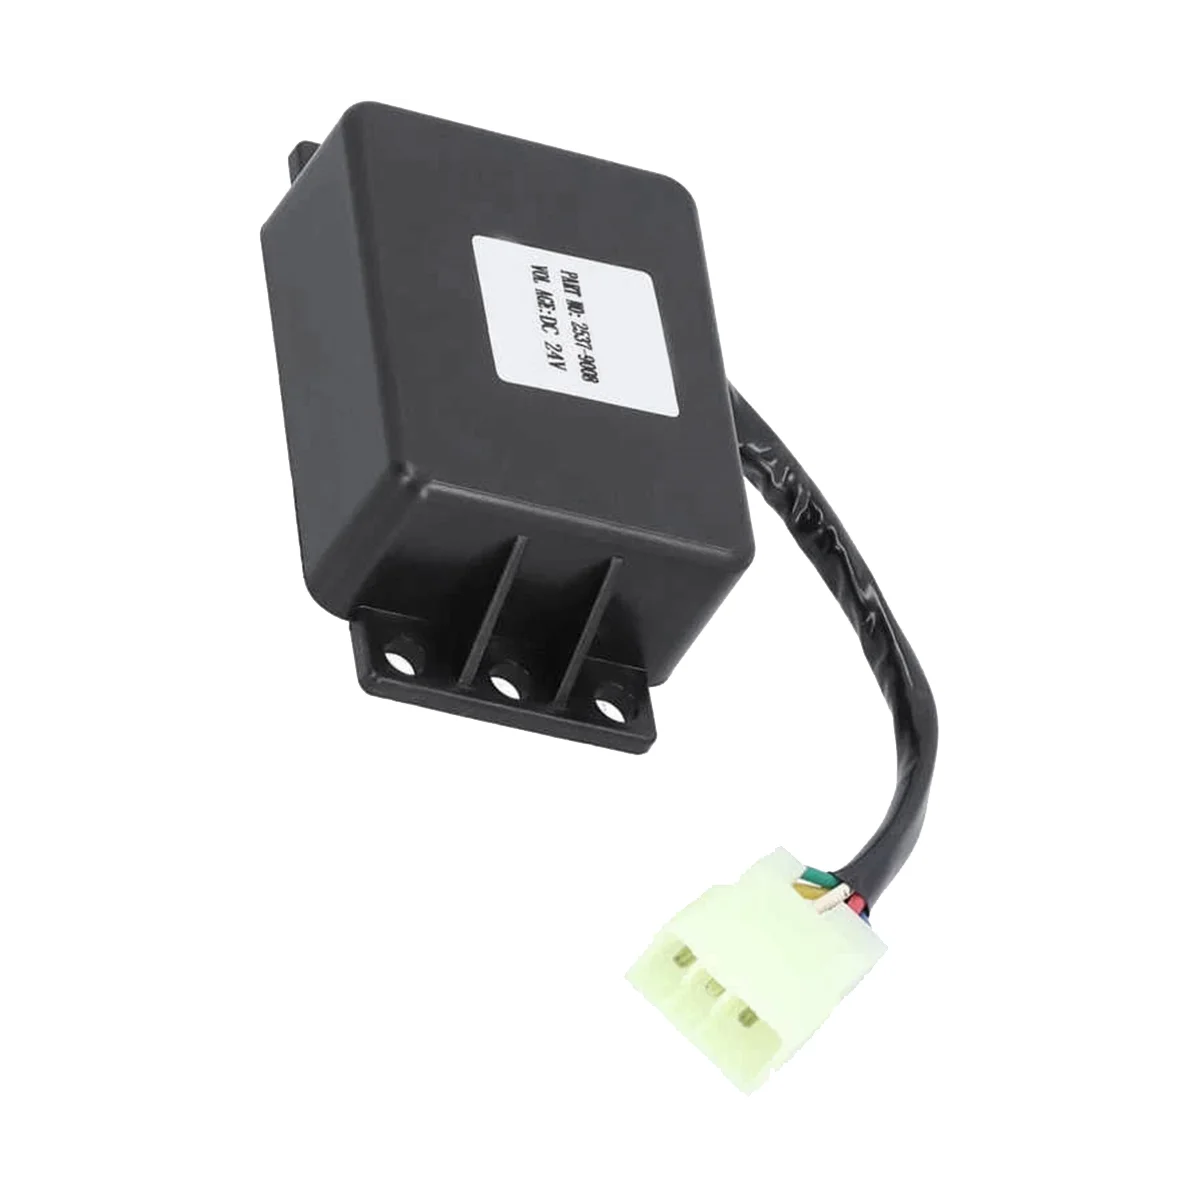 

2537-9008 Excavator Wiper Controller Safety Relay for Doosan DH130-5 DH140-5 DH150-5 Construction